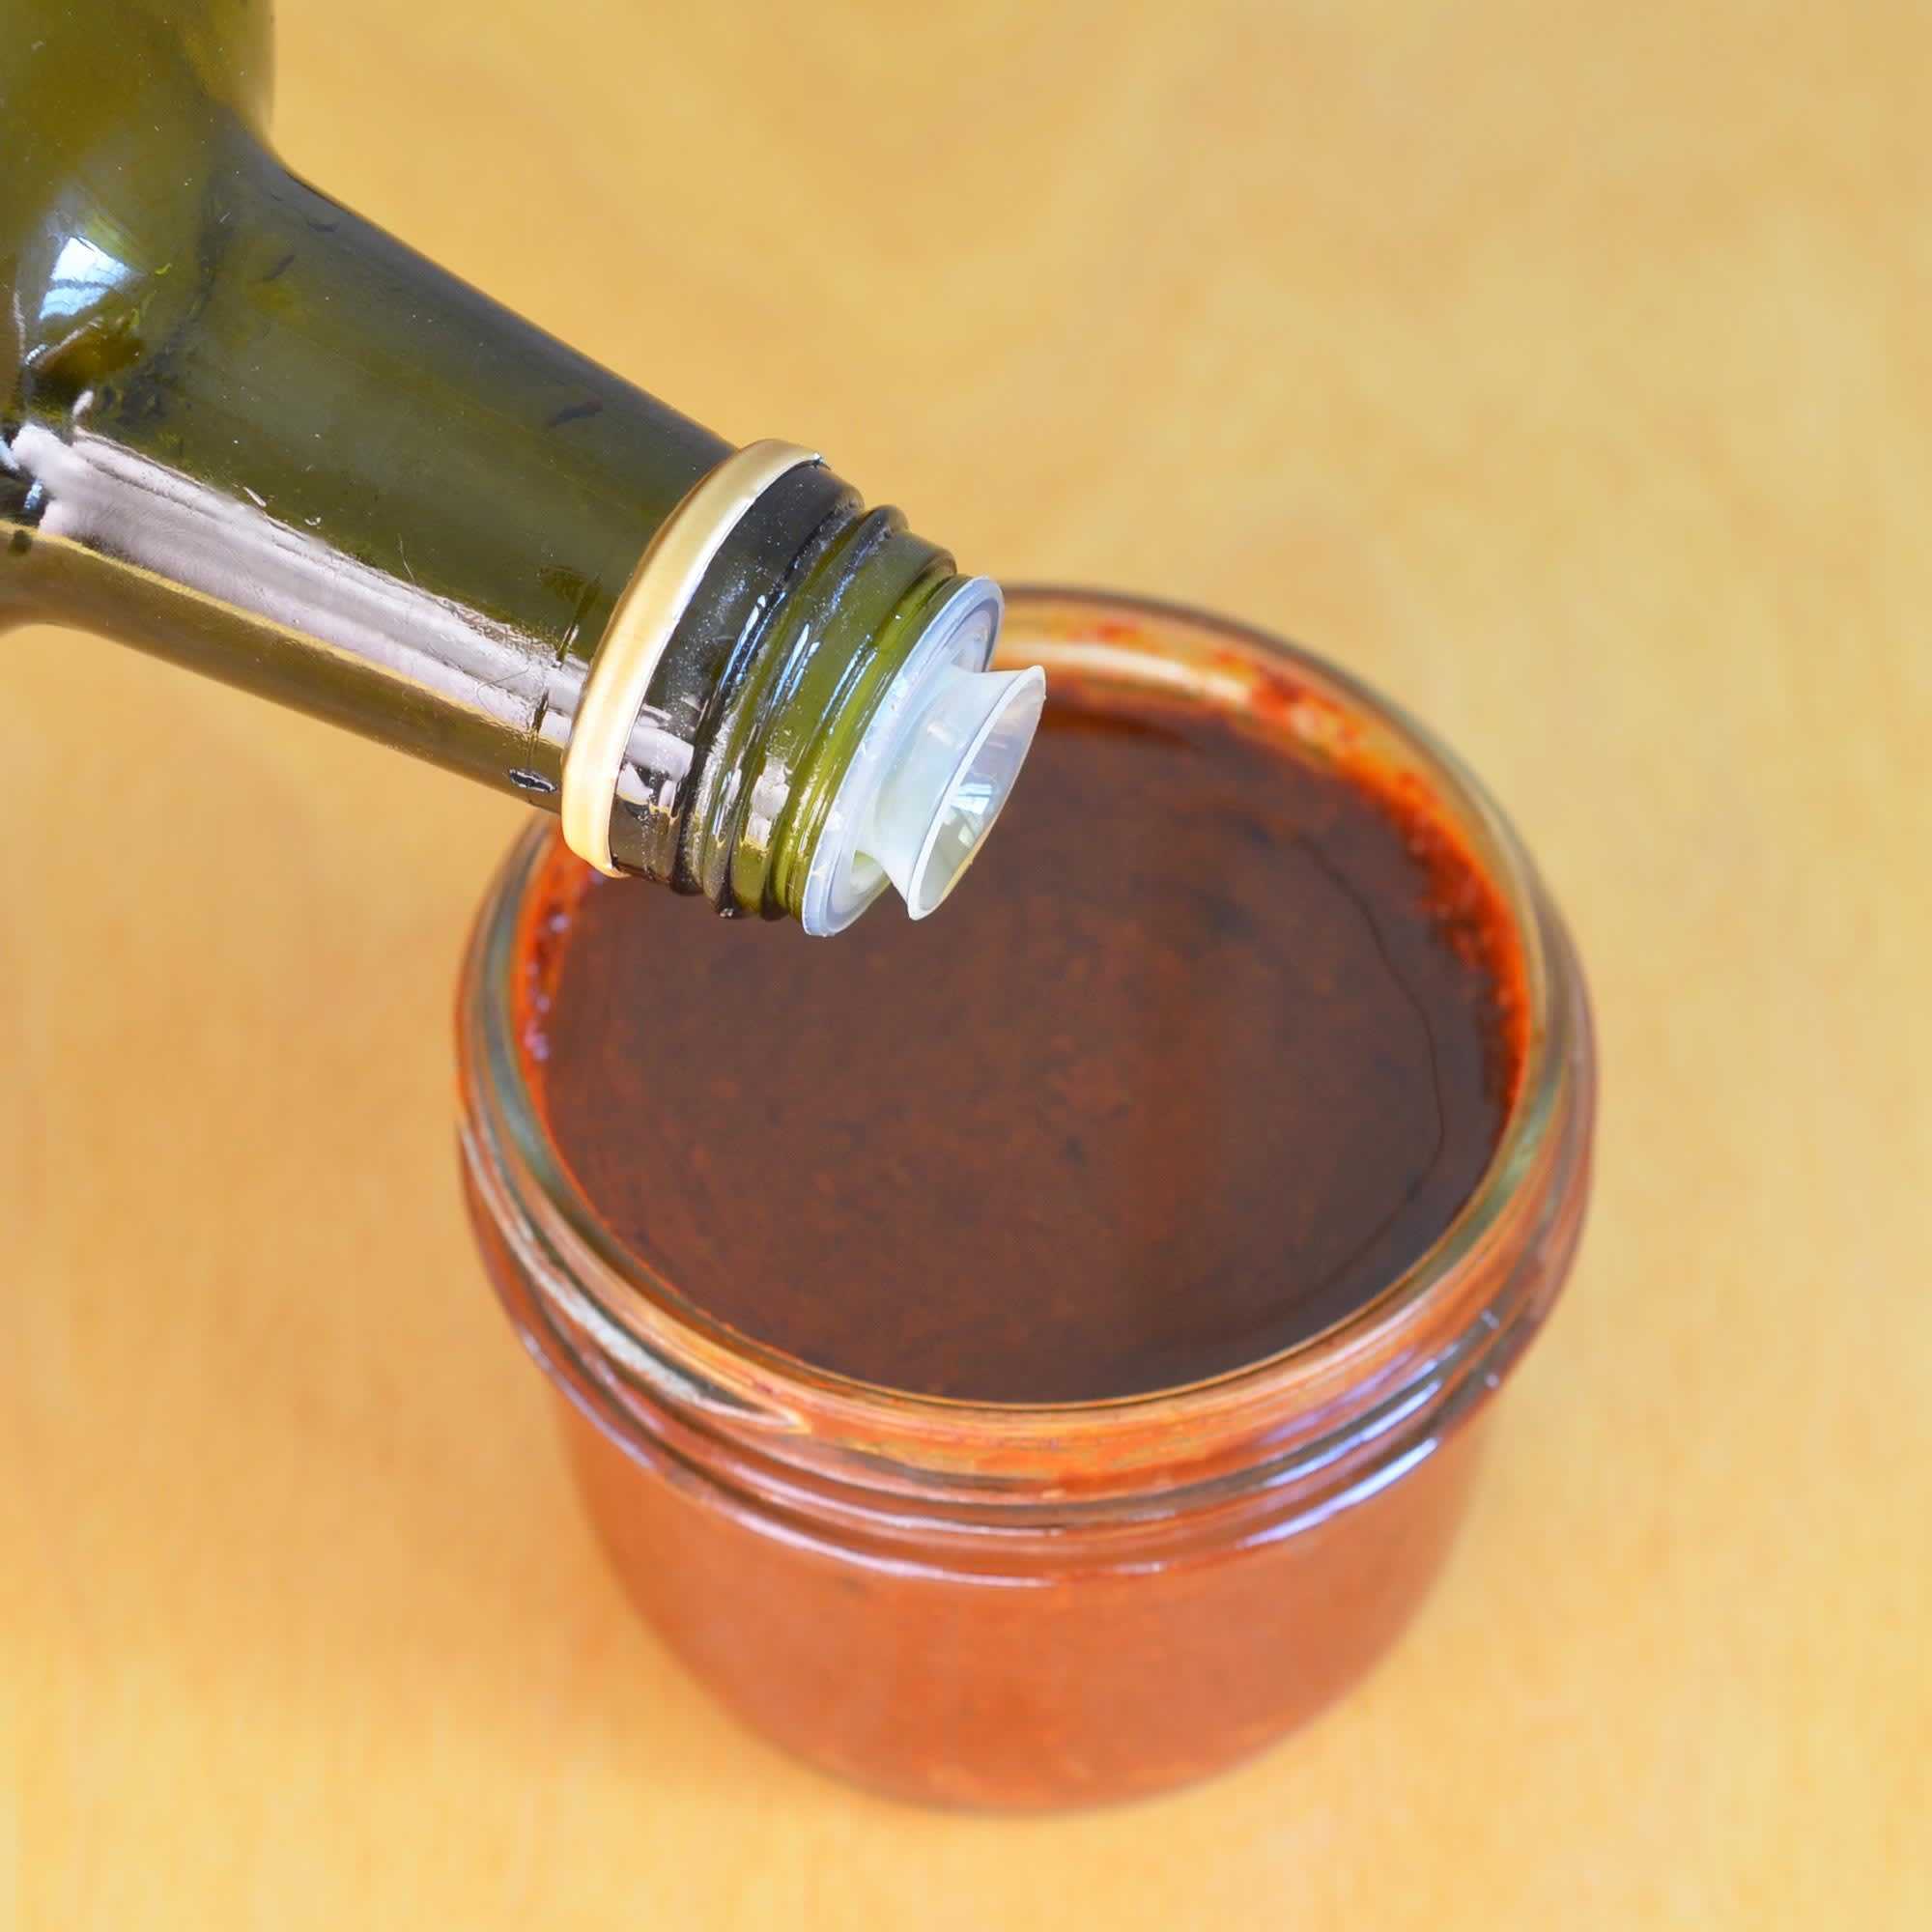 How to Make Harissa Paste - The Forked Spoon